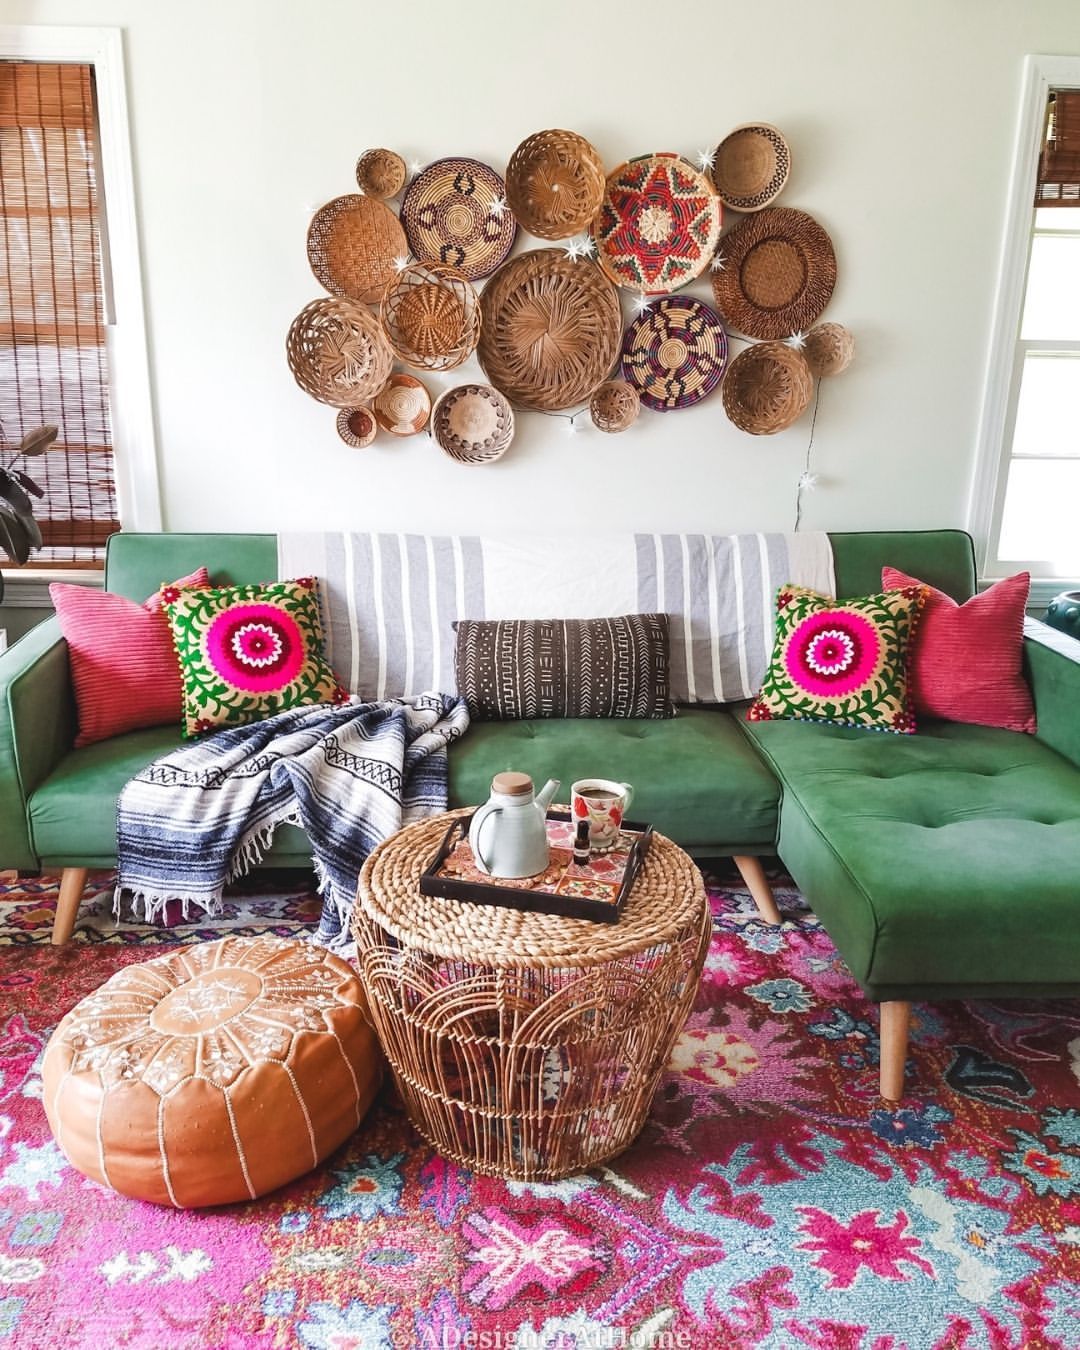 Mix Eclectic Textiles and Natural Elements